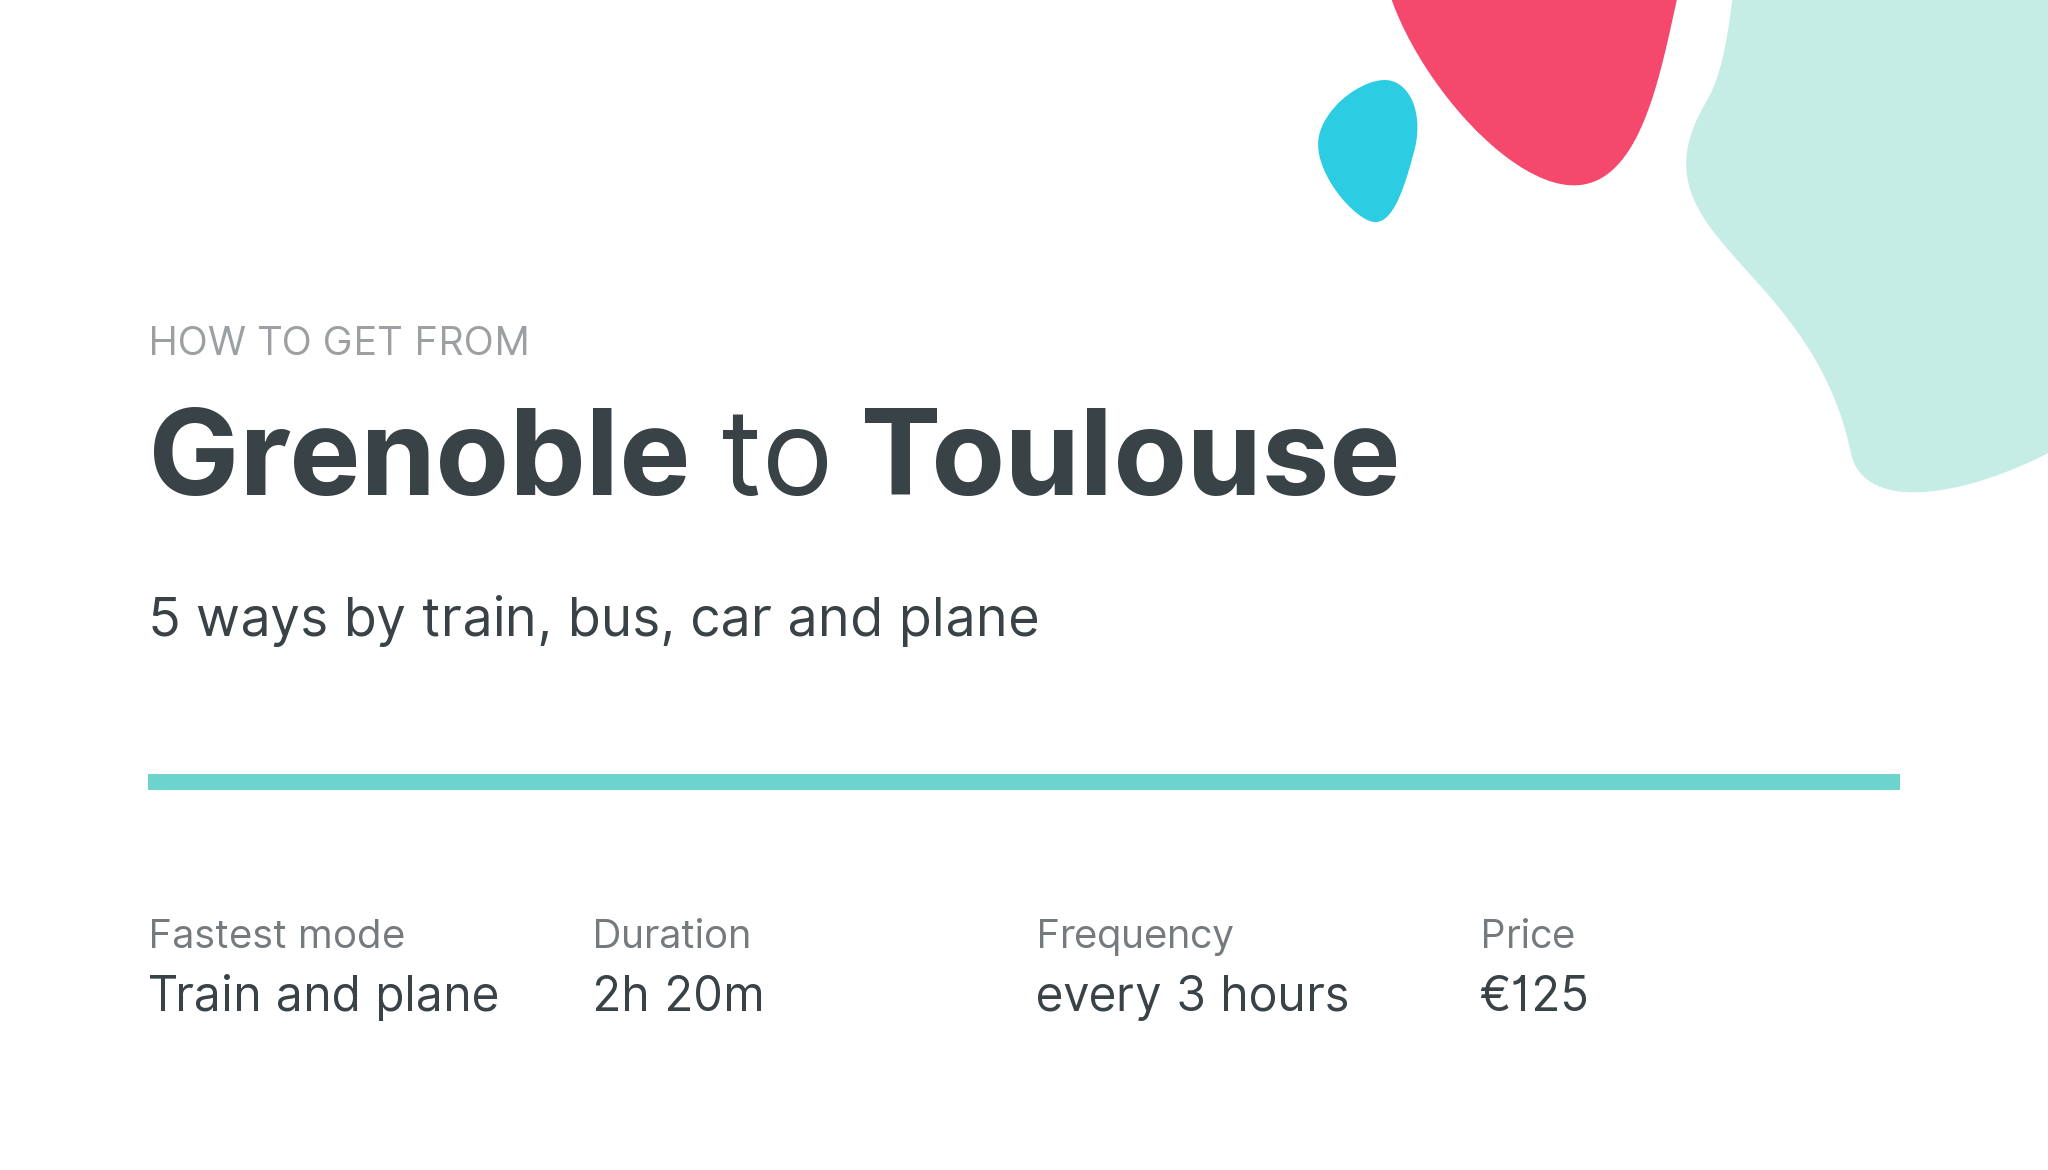 How do I get from Grenoble to Toulouse